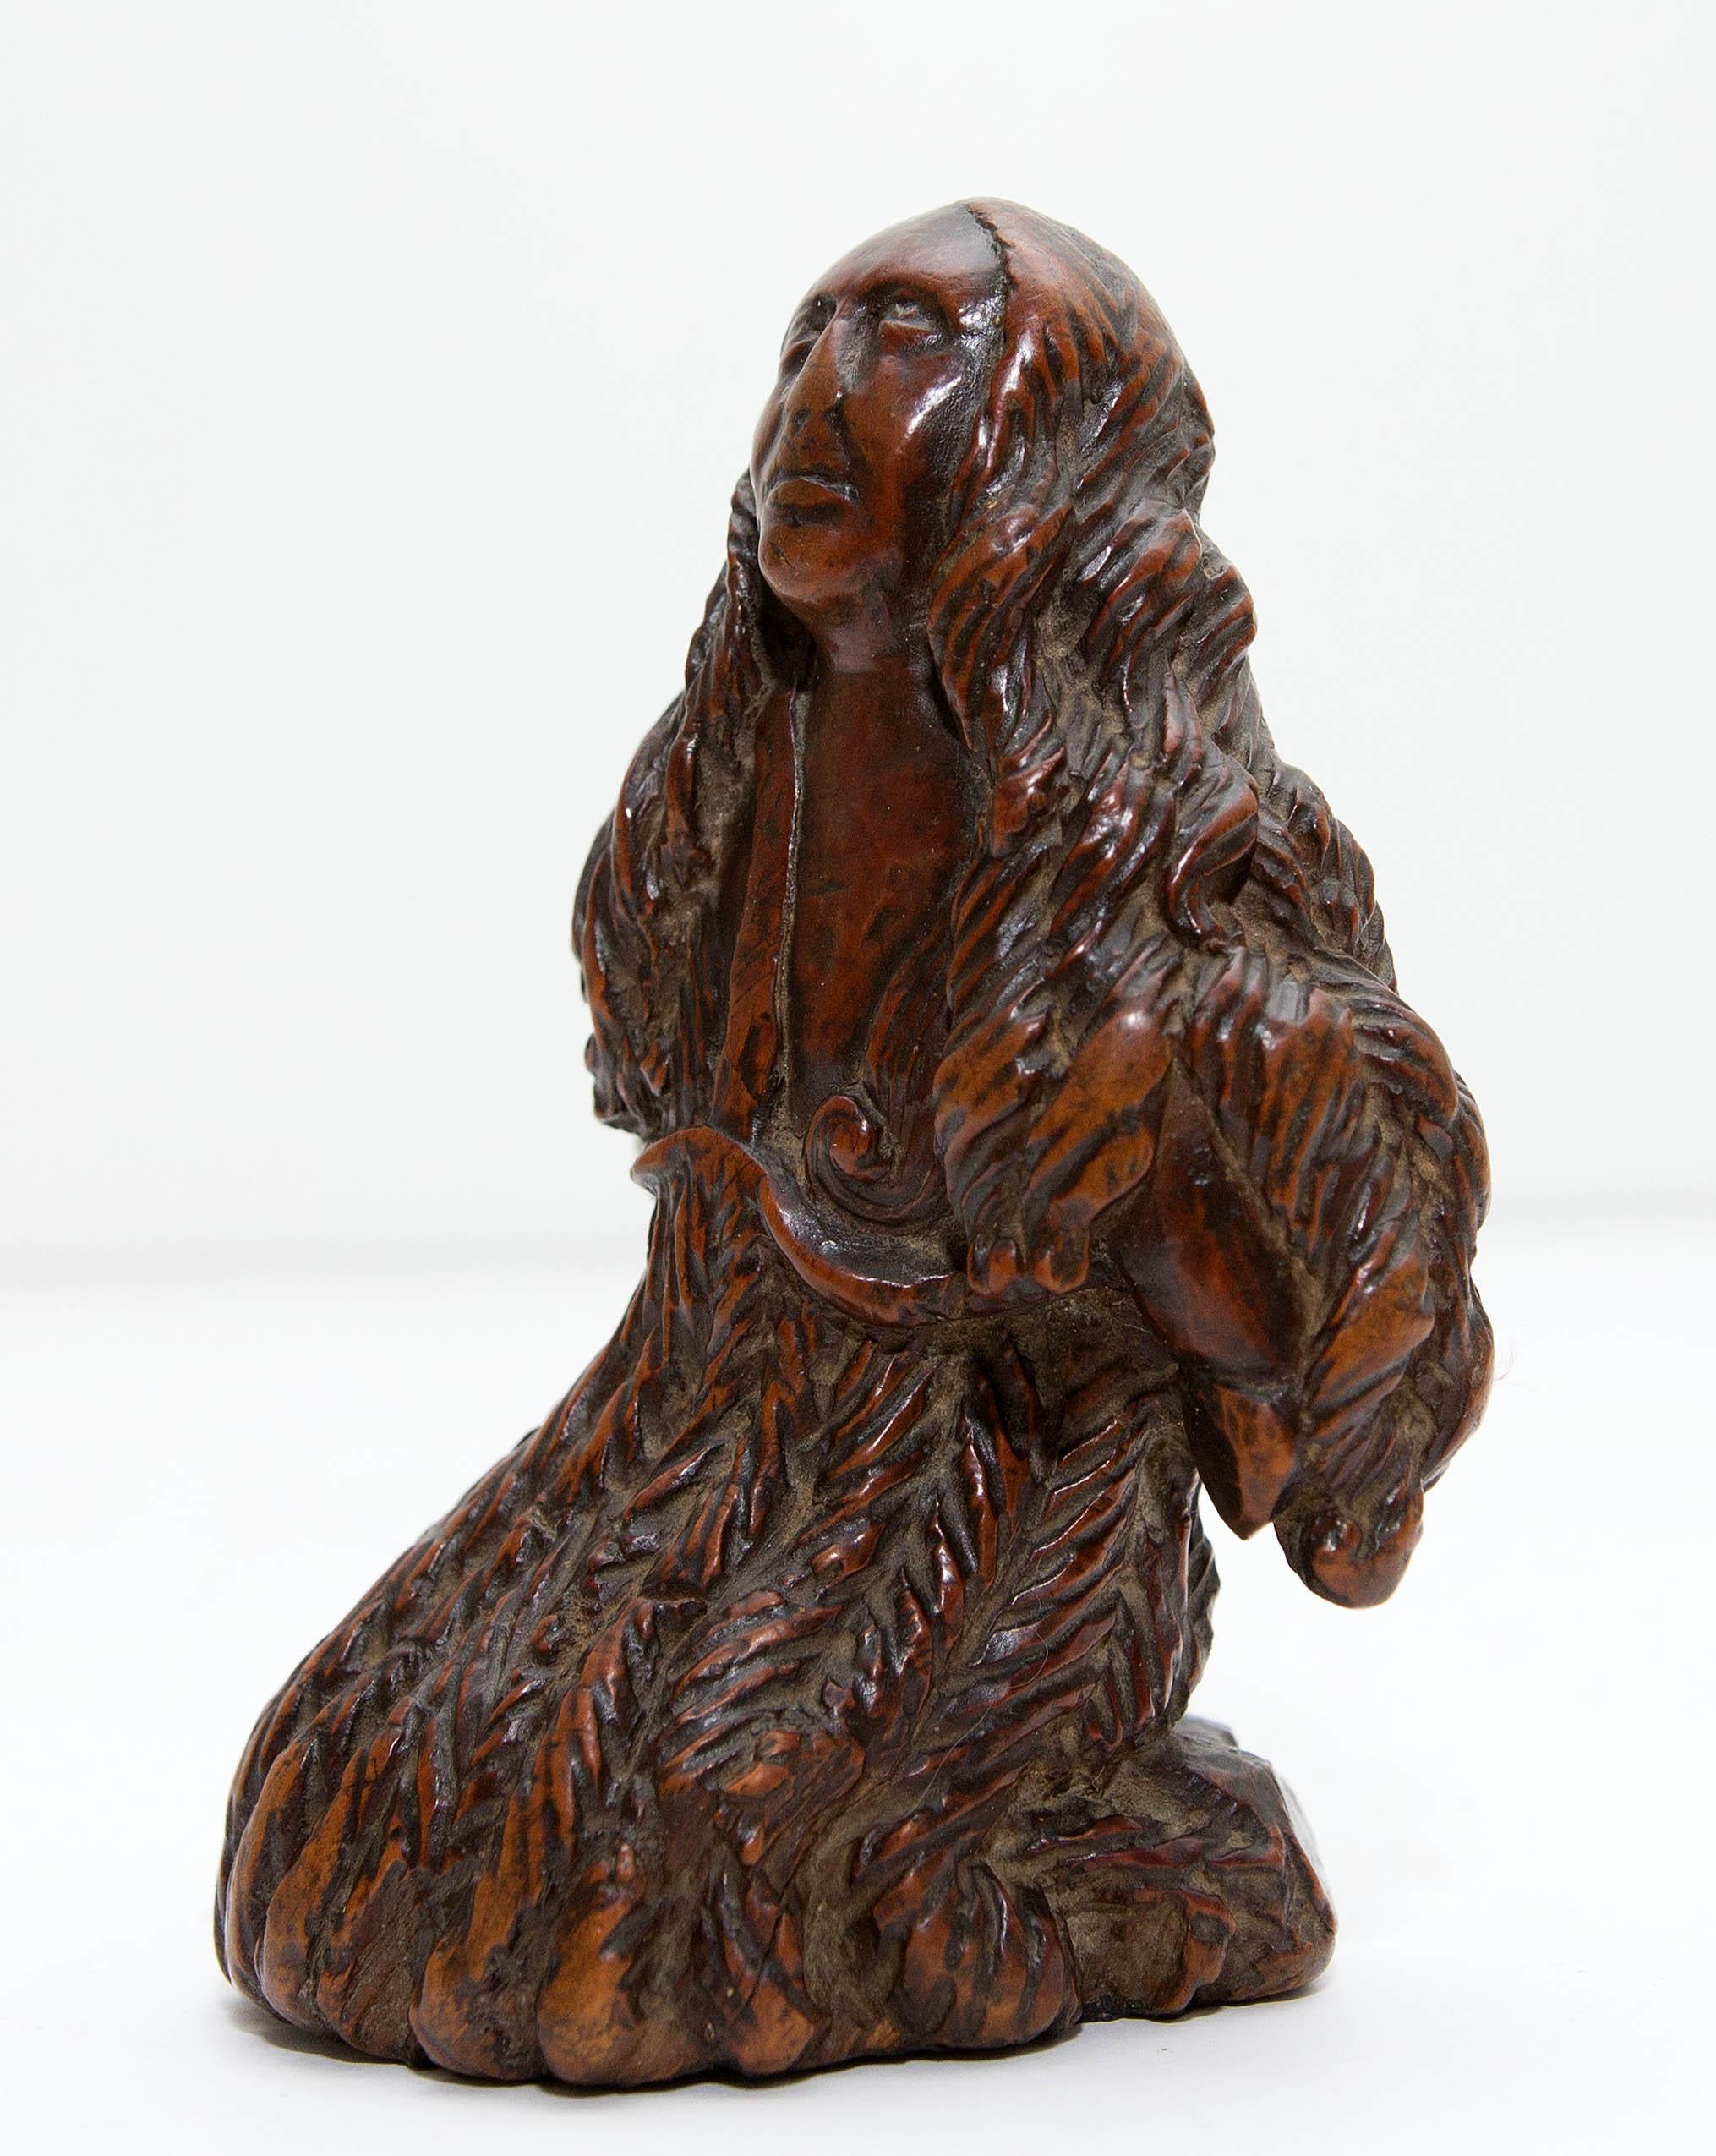 Antique carving of a saint or martyr. 17th century Flemish hardwood carving. Wonderful wear and rich color.